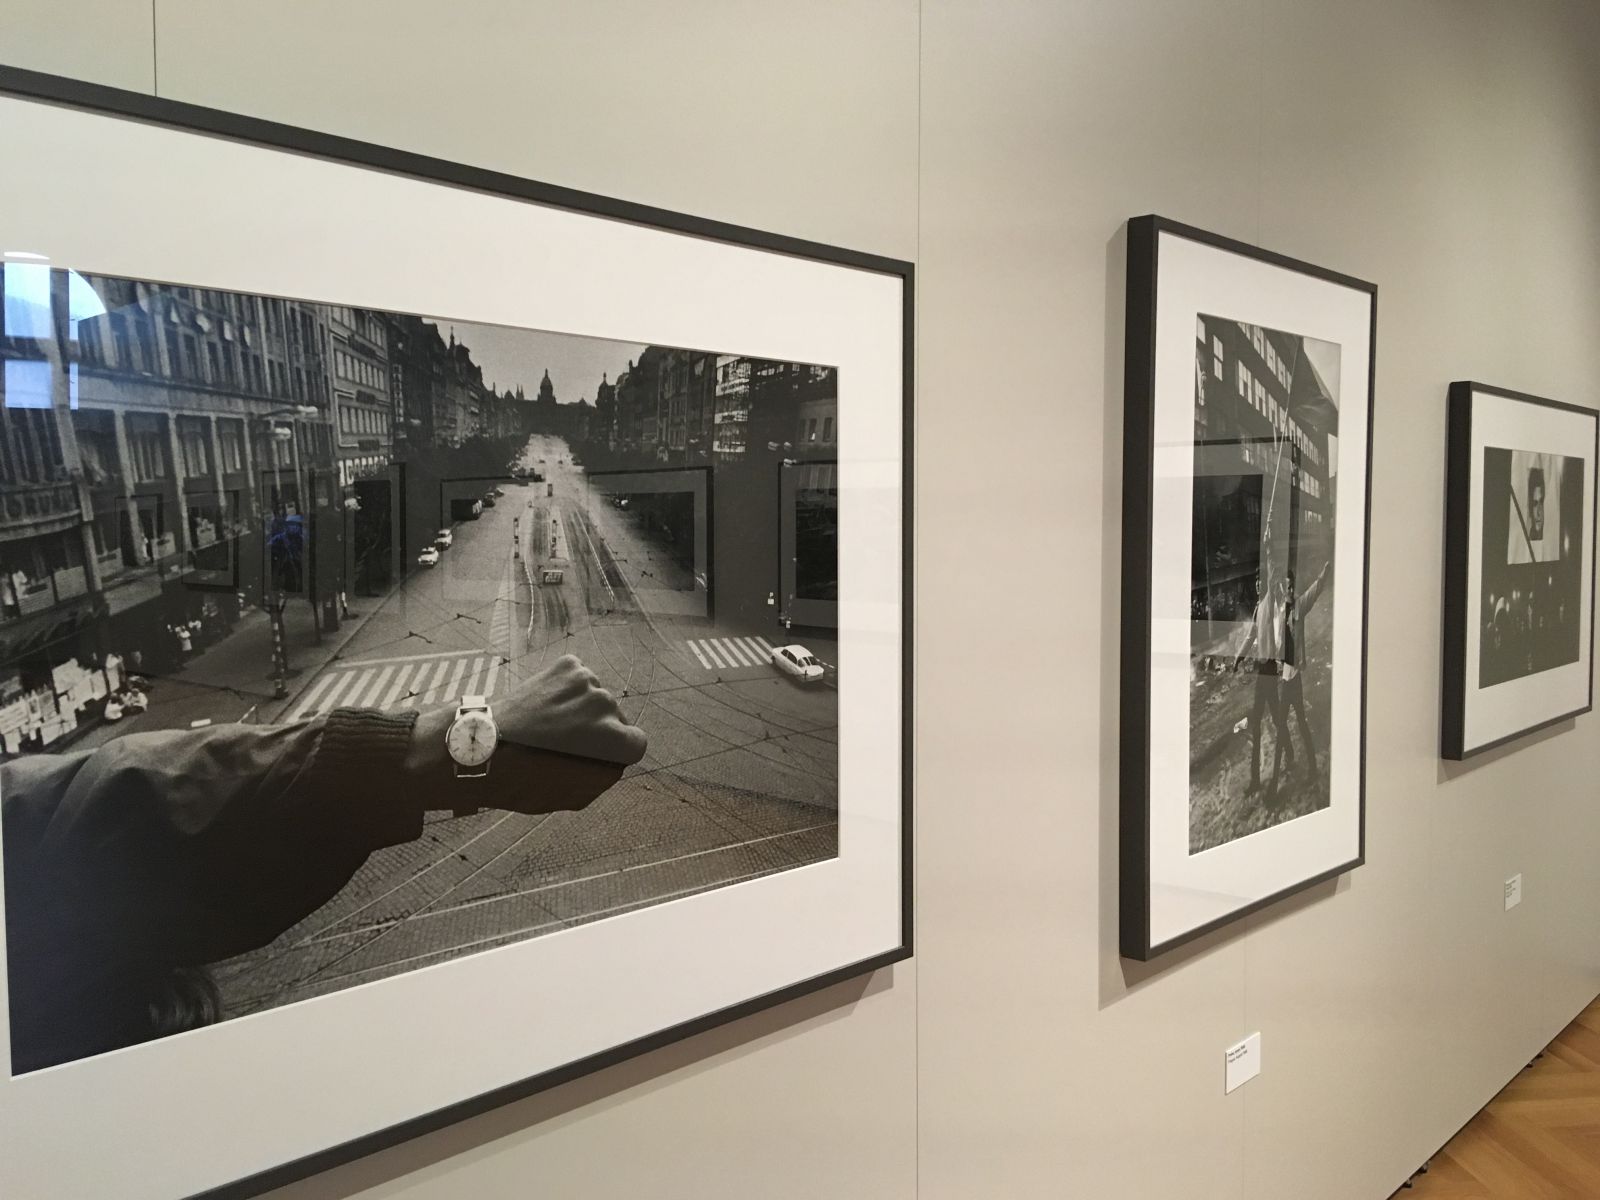 Part of the Josef Koudelka exhibition at the Museum of Decorative Arts.